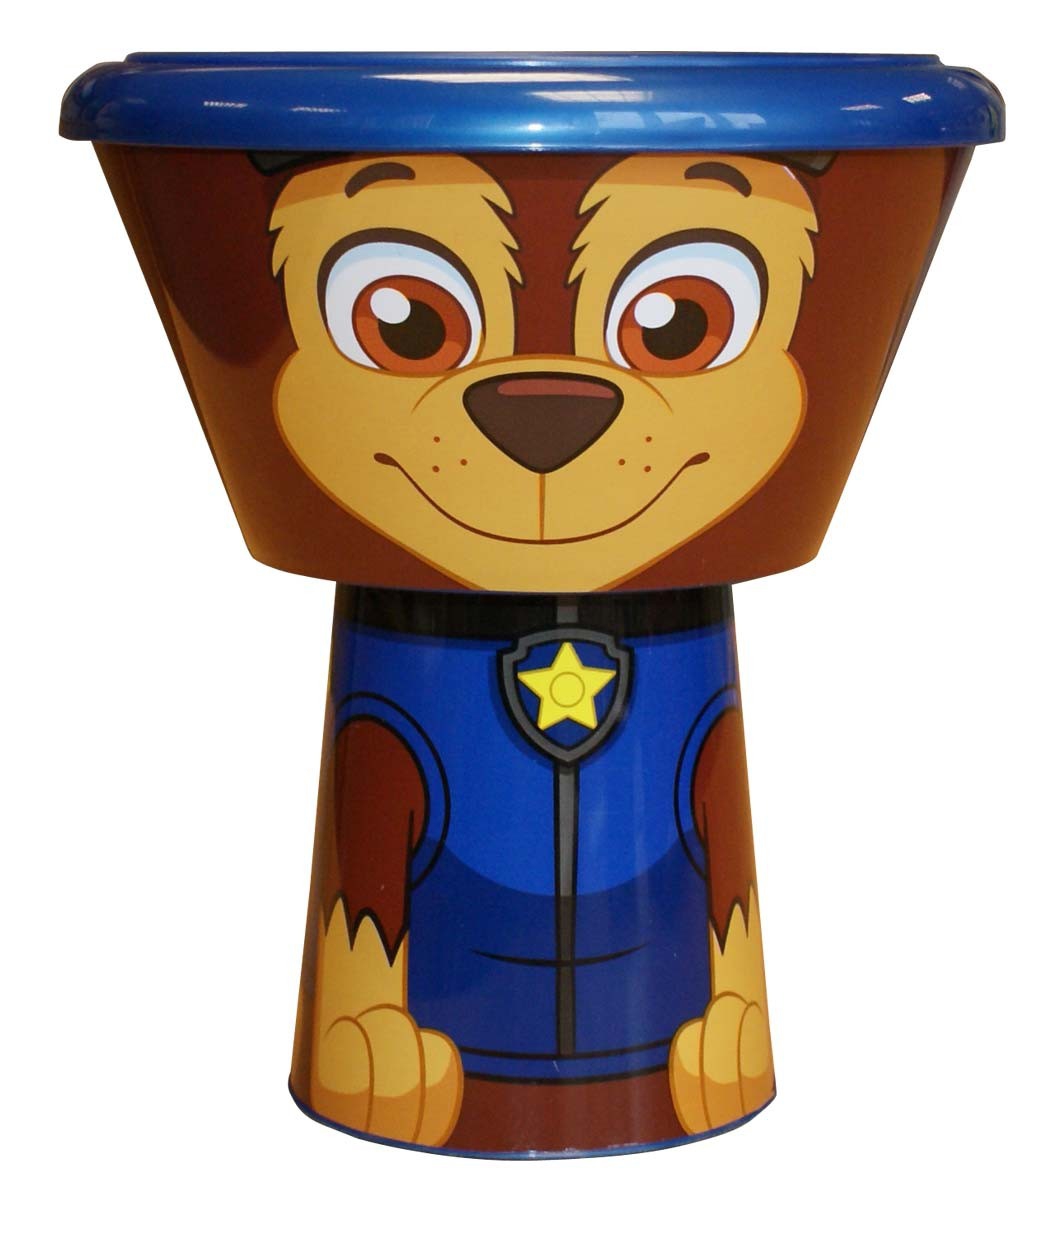 Paw Patrol 'Chase' Boys Stacking 3 Piece Meal Set Dinner